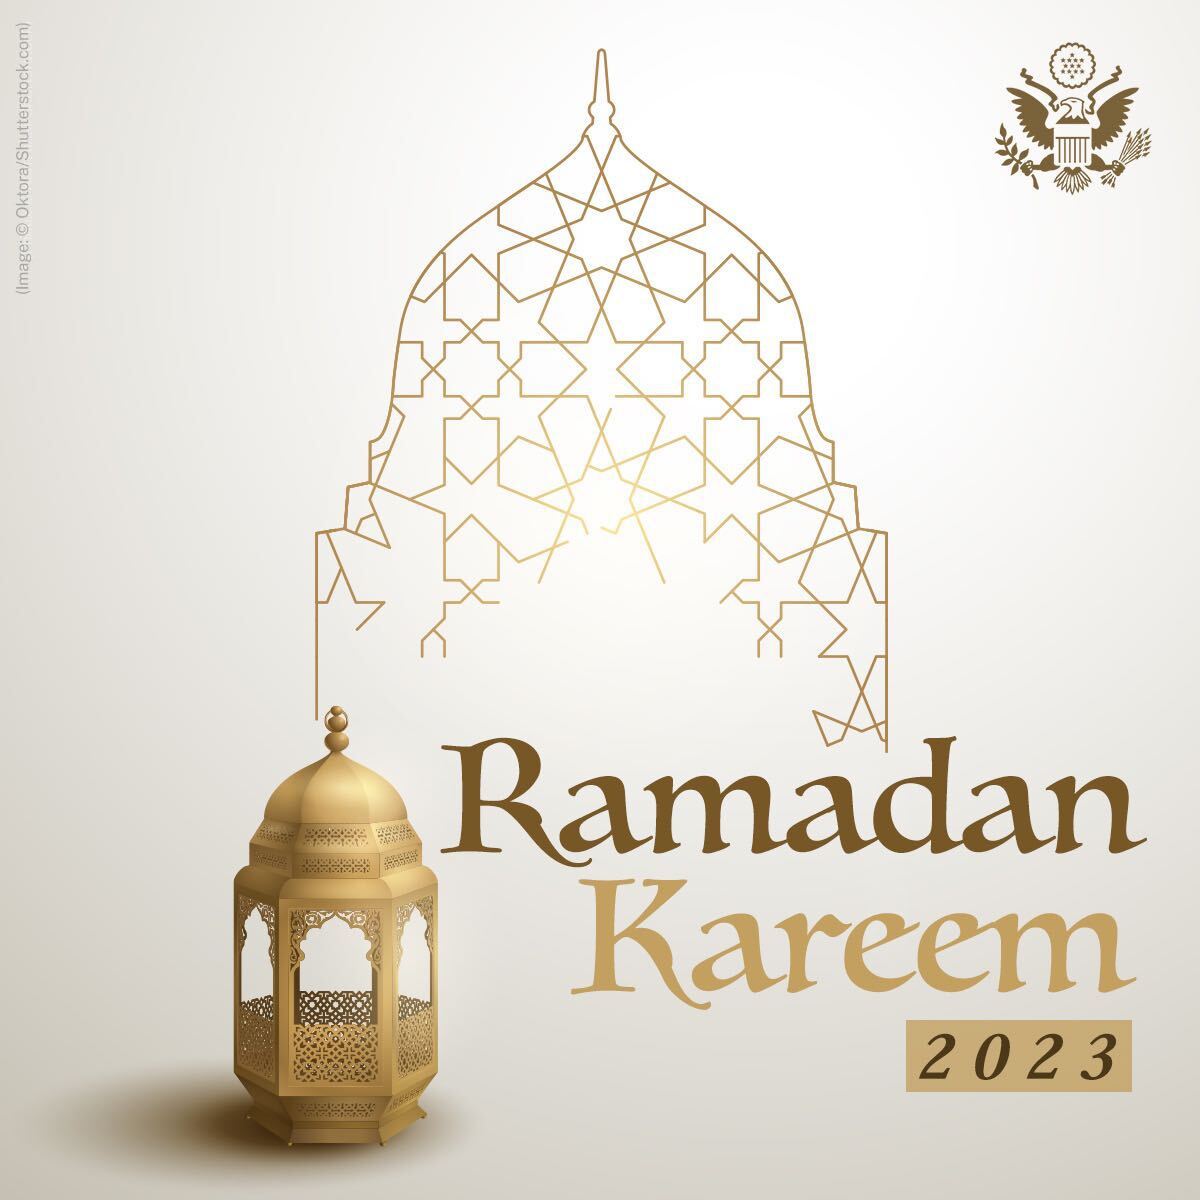 Incredible Compilation of Full 4K Ramadan Kareem Images – Over 999 Exquisite Options